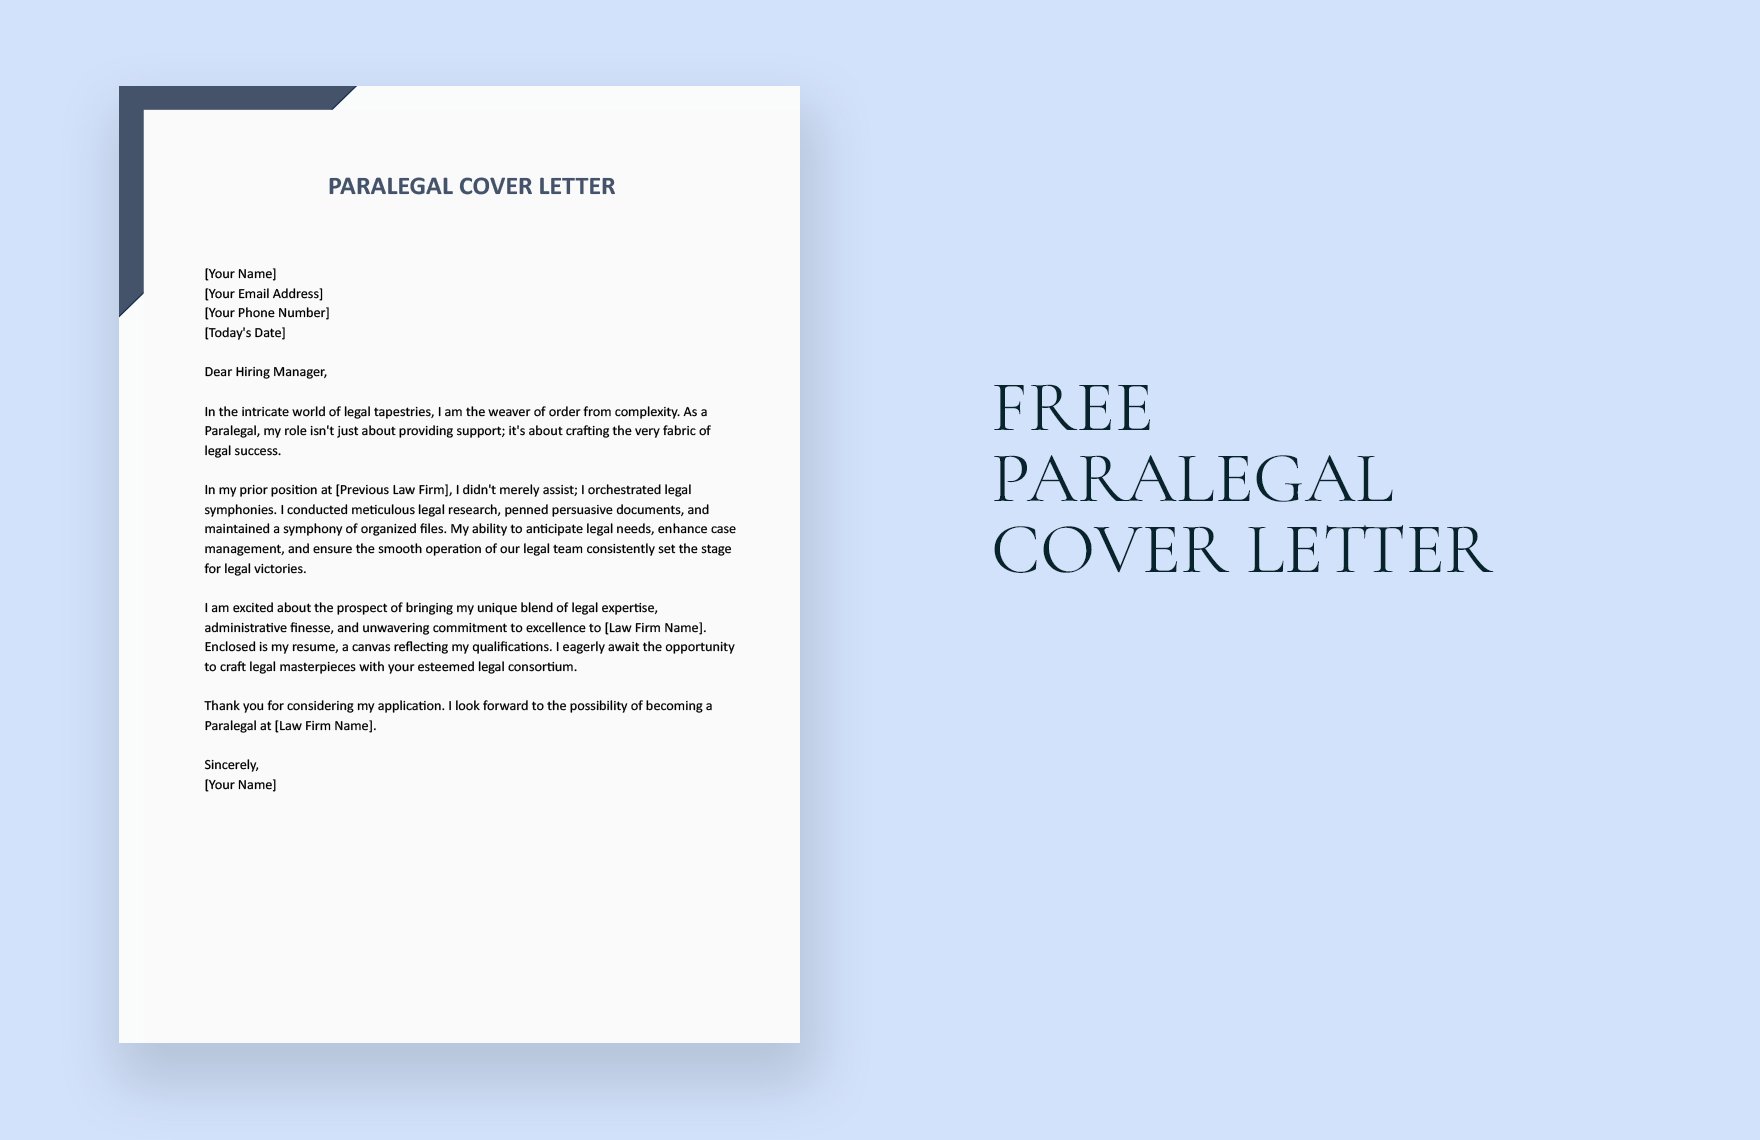 Paralegal Cover Letter in Word, Google Docs